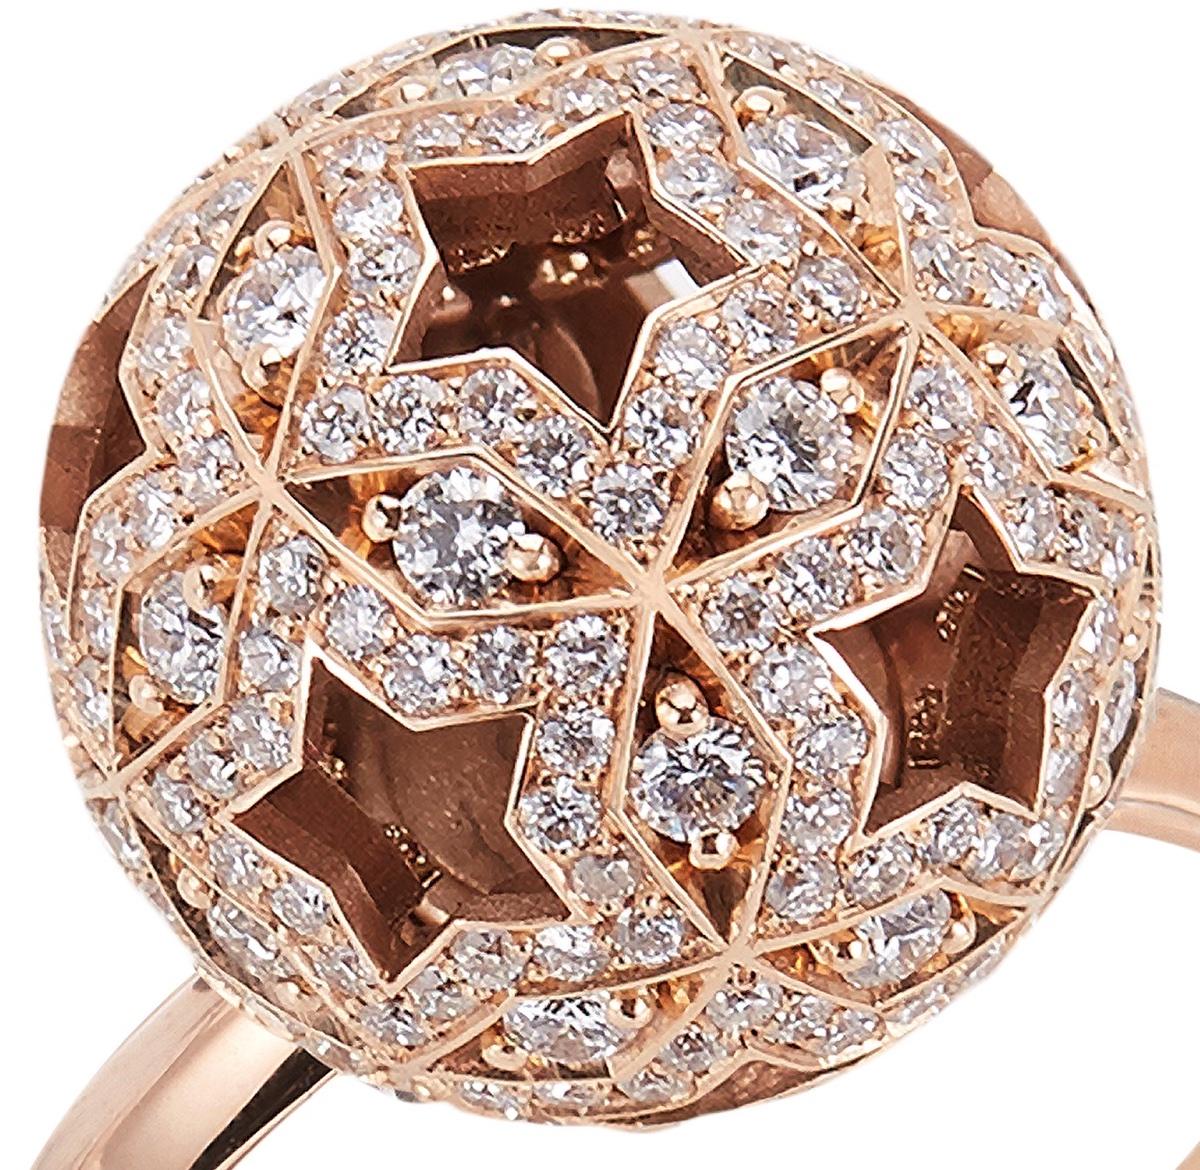 A unique ring design inspired by the constellations of the night sky and created with Hirsh Celestial Movement.

- 245 round cut diamonds weighing approx. 1 carat in total
- Created in 18K rose gold with 28 hidden ruby jewel spheres

This exquisite